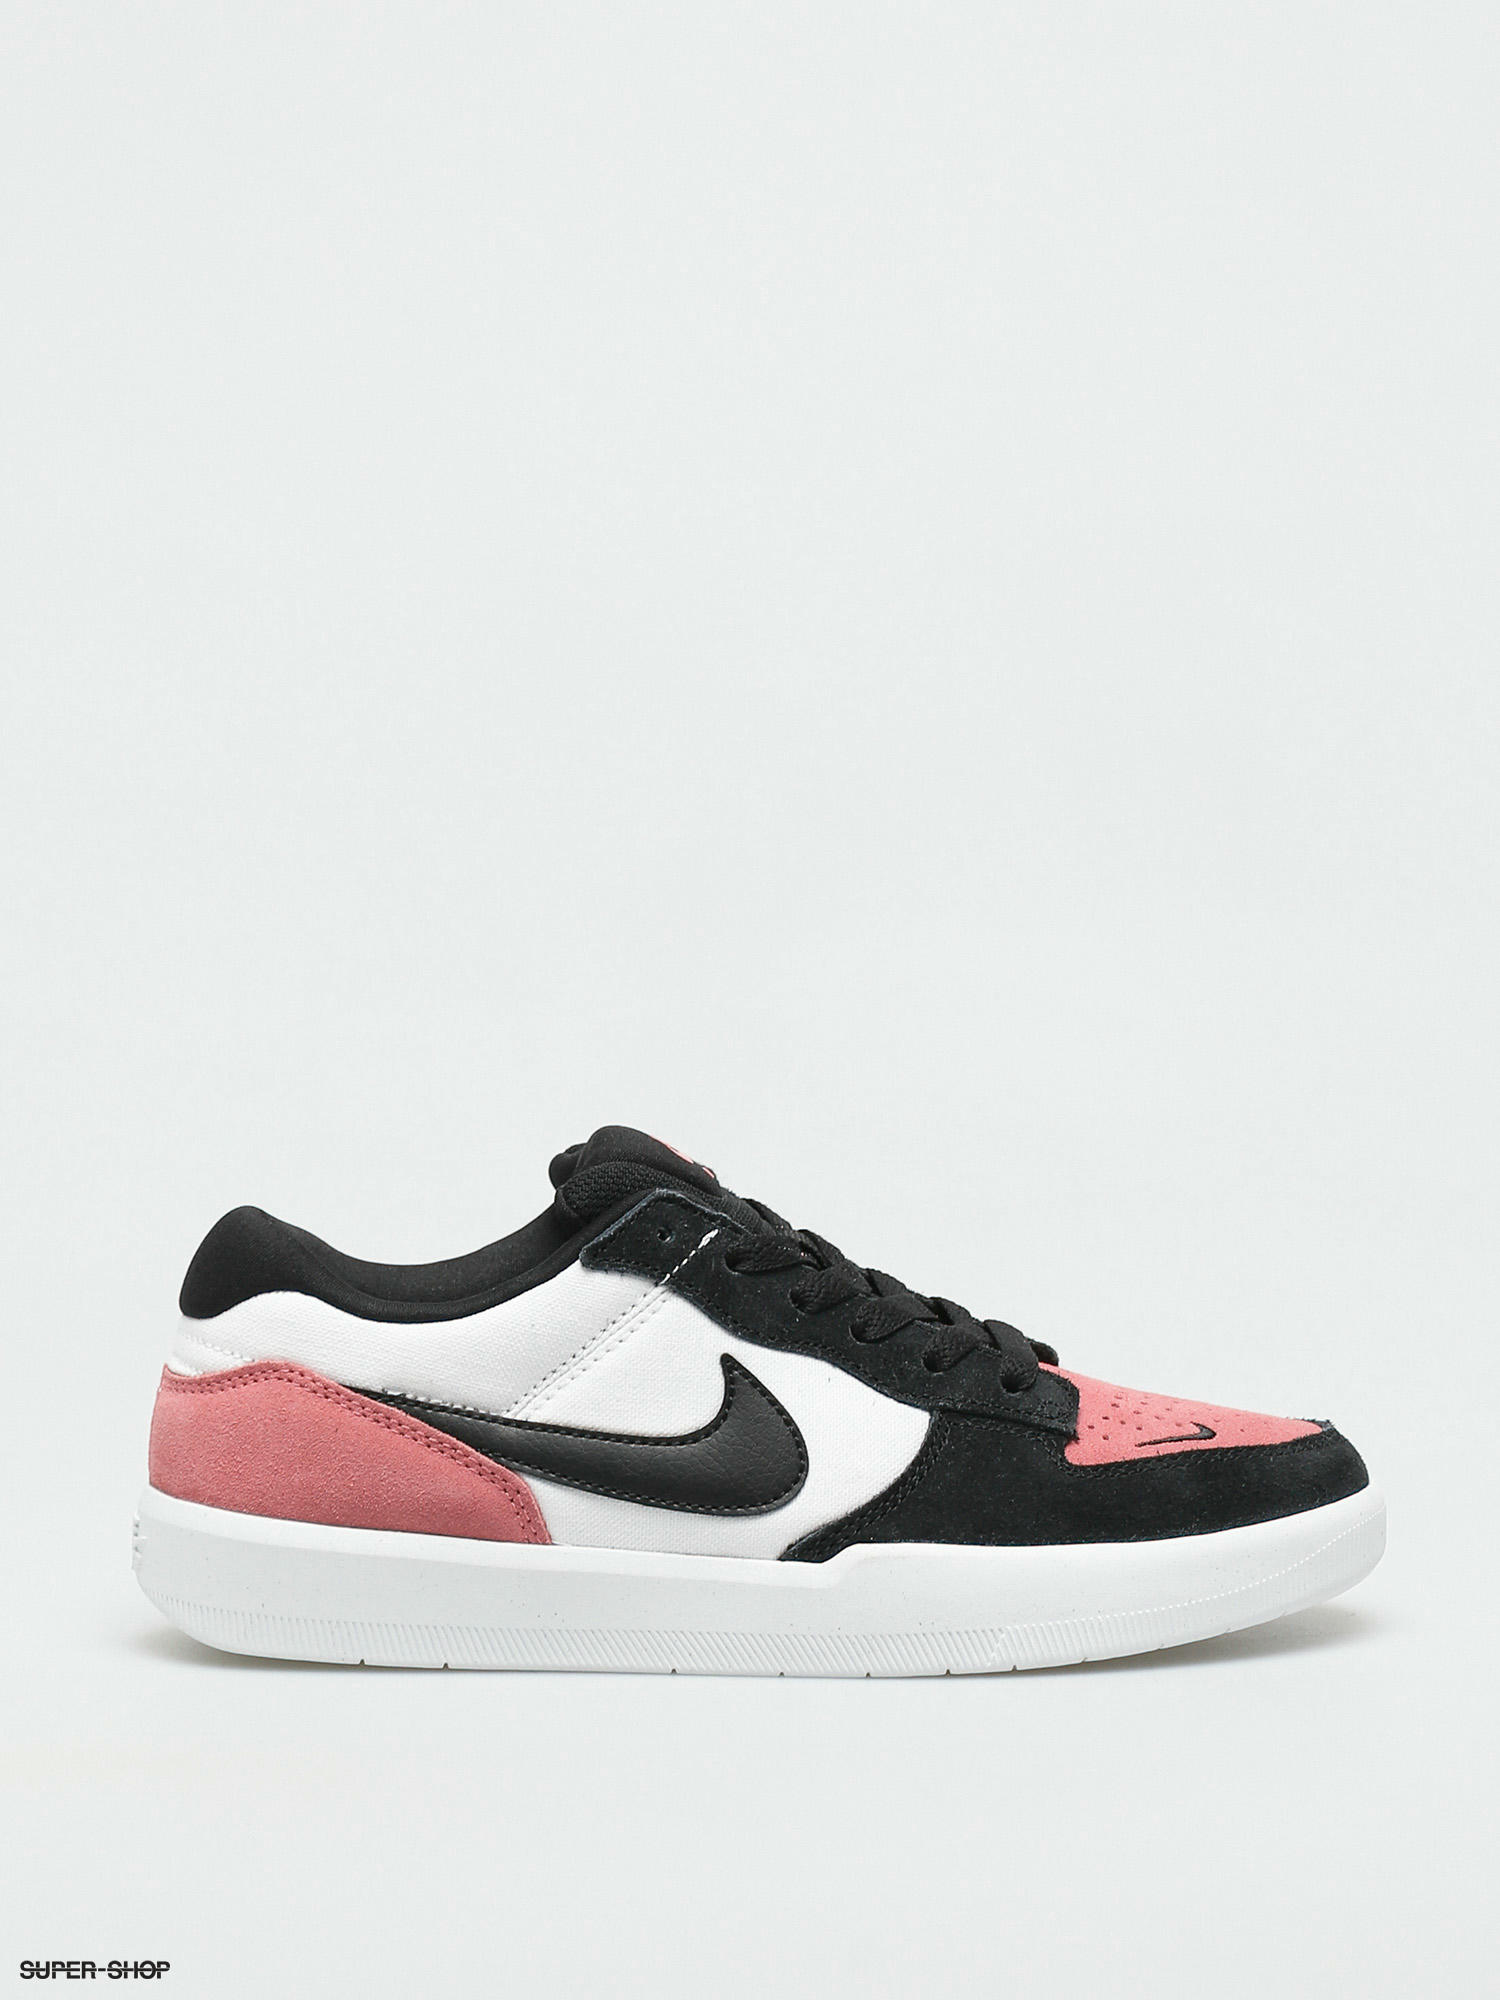 nike sneakers pink and black